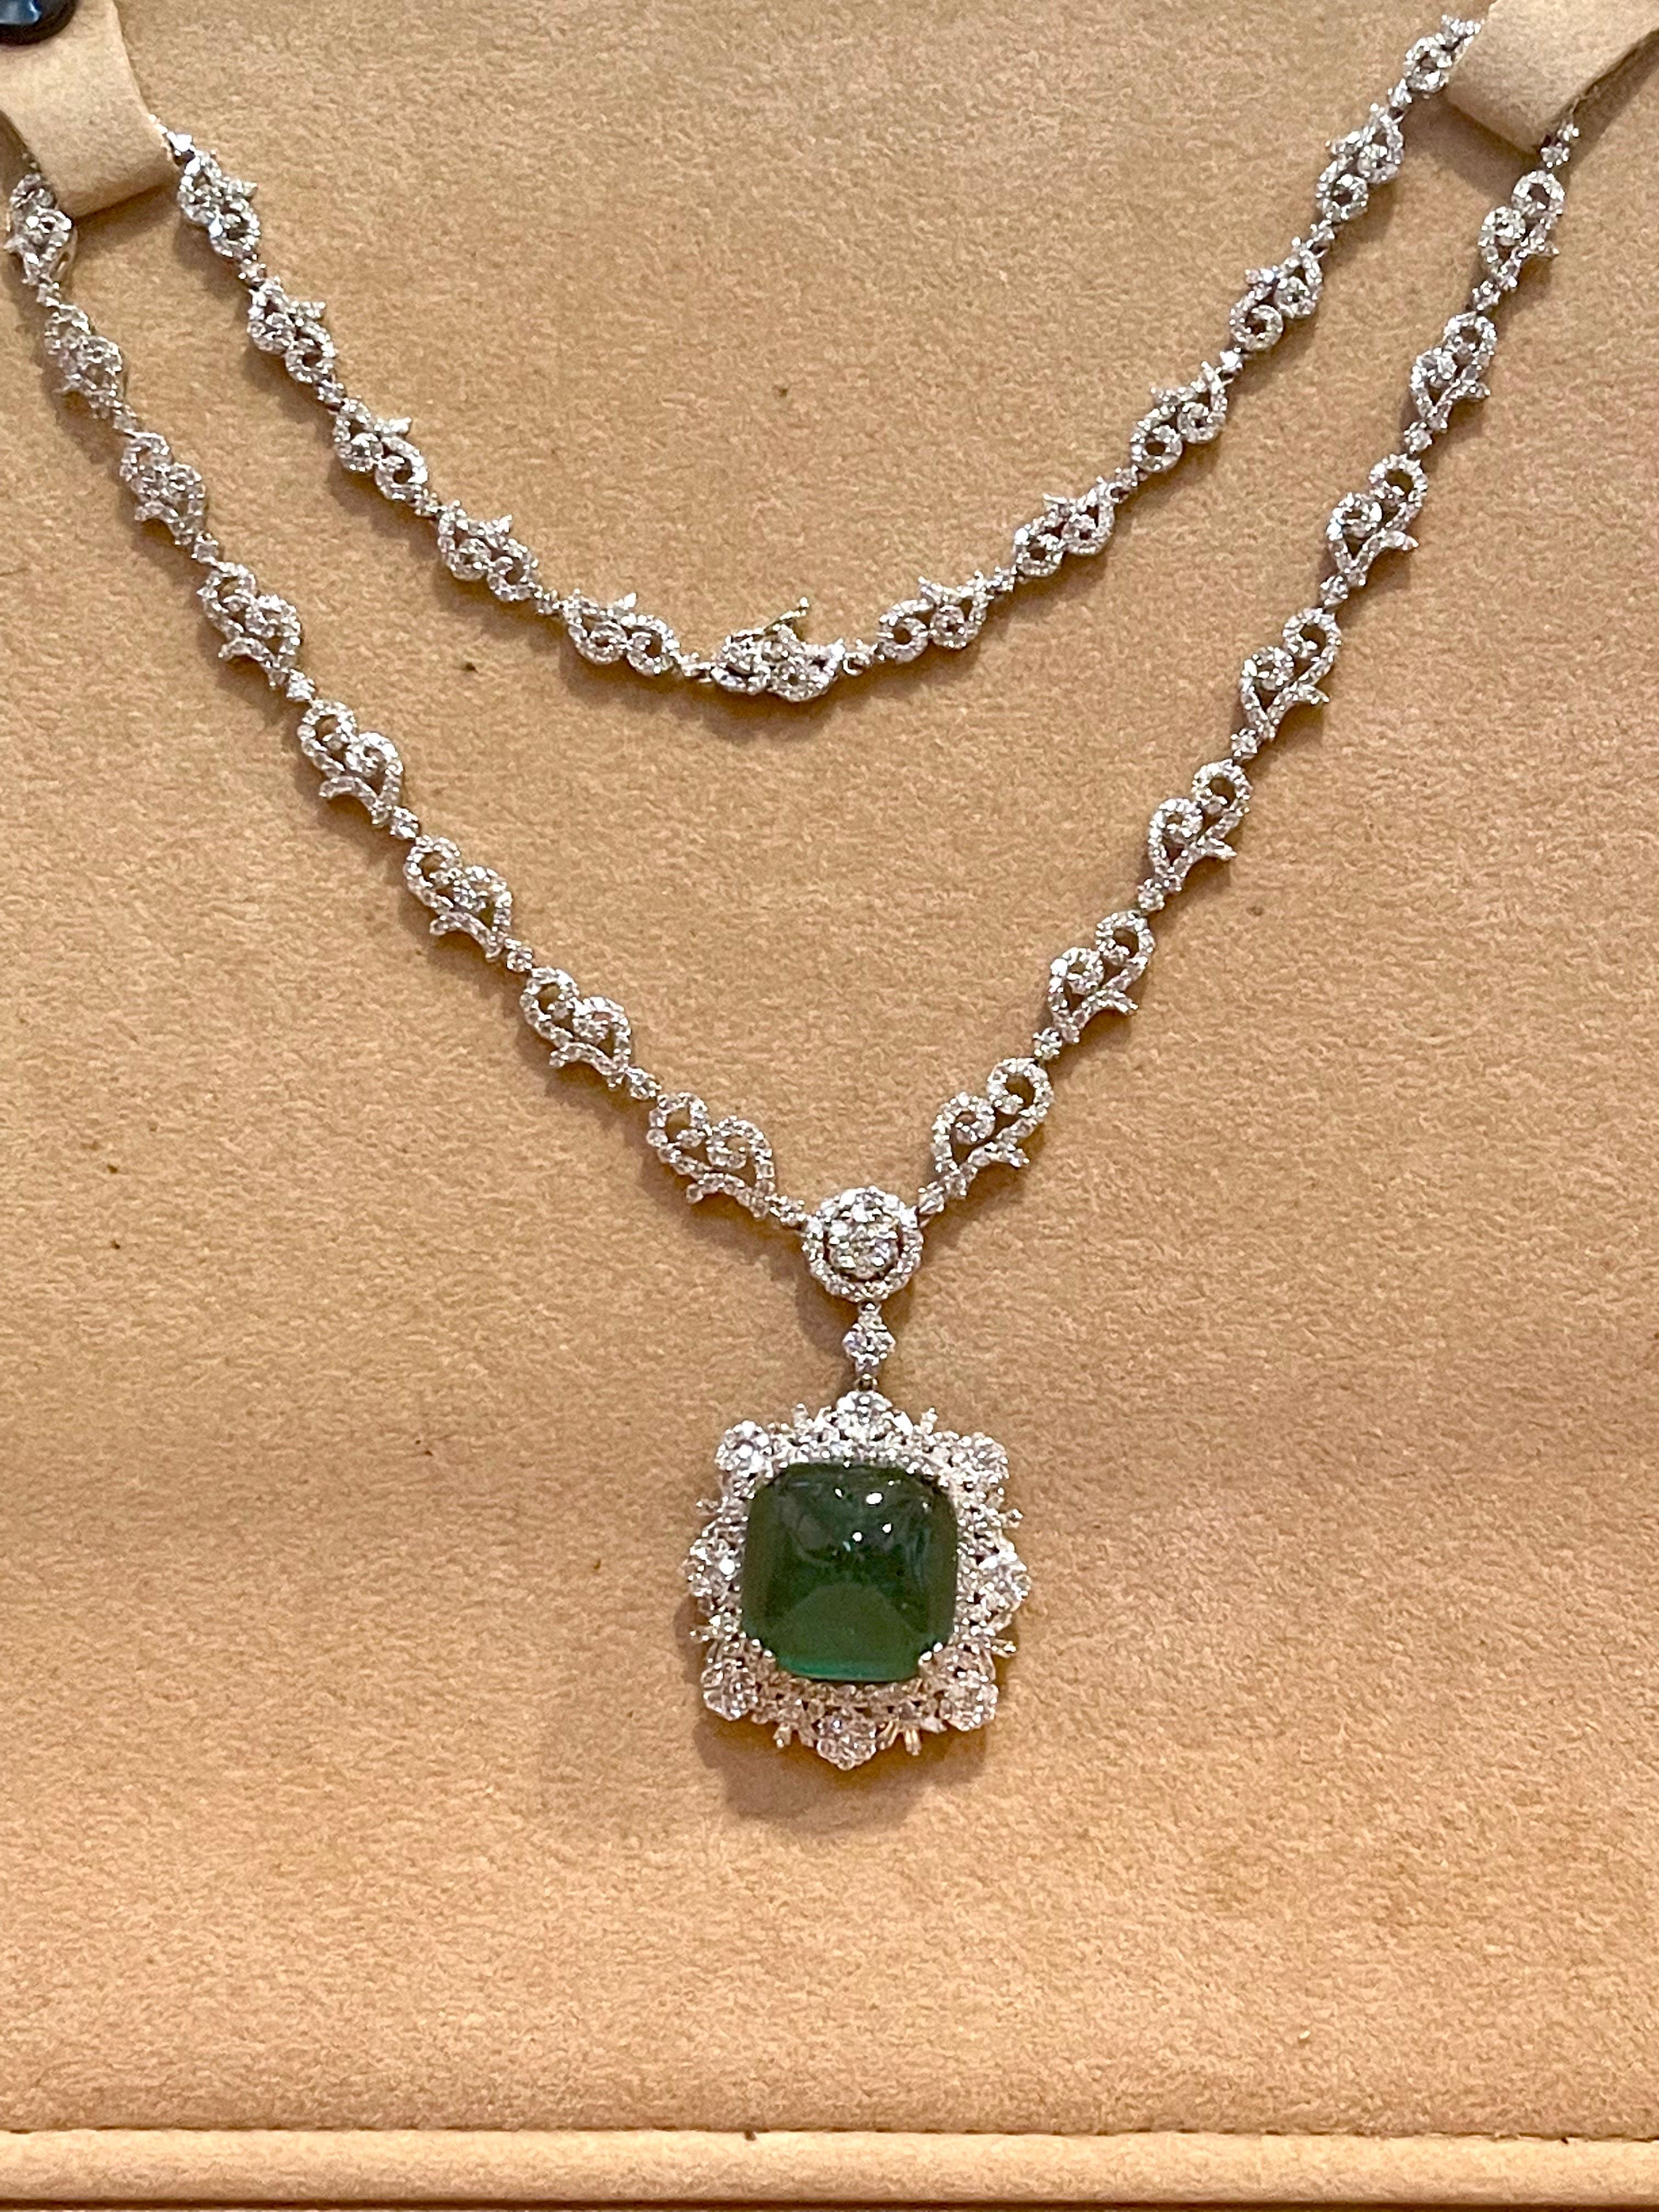 GIA 17 Ct Sugar Loaf Cabochon Colombian Emerald & 13 Ct Diamond Necklace 18KWG In Excellent Condition For Sale In New York, NY